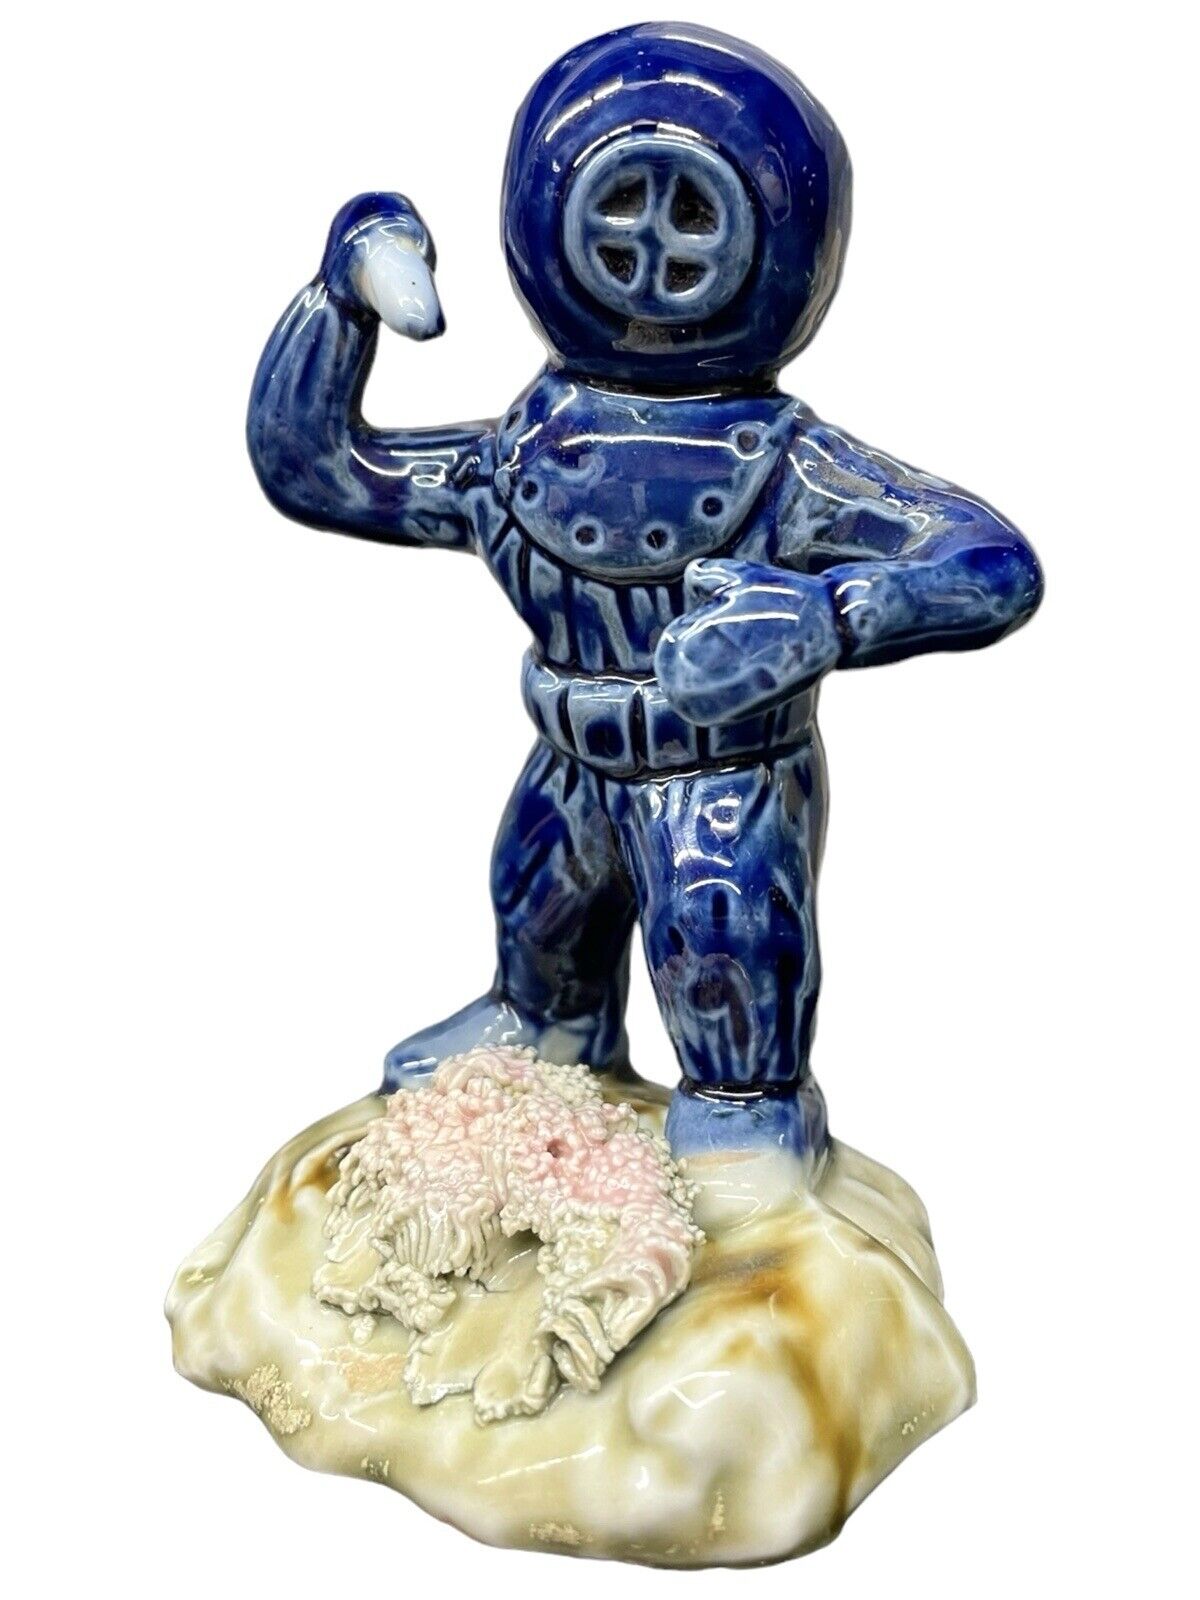 Scuba Diver Figurine Made in JAPAN w/ Coral Reef 3.5” Tall